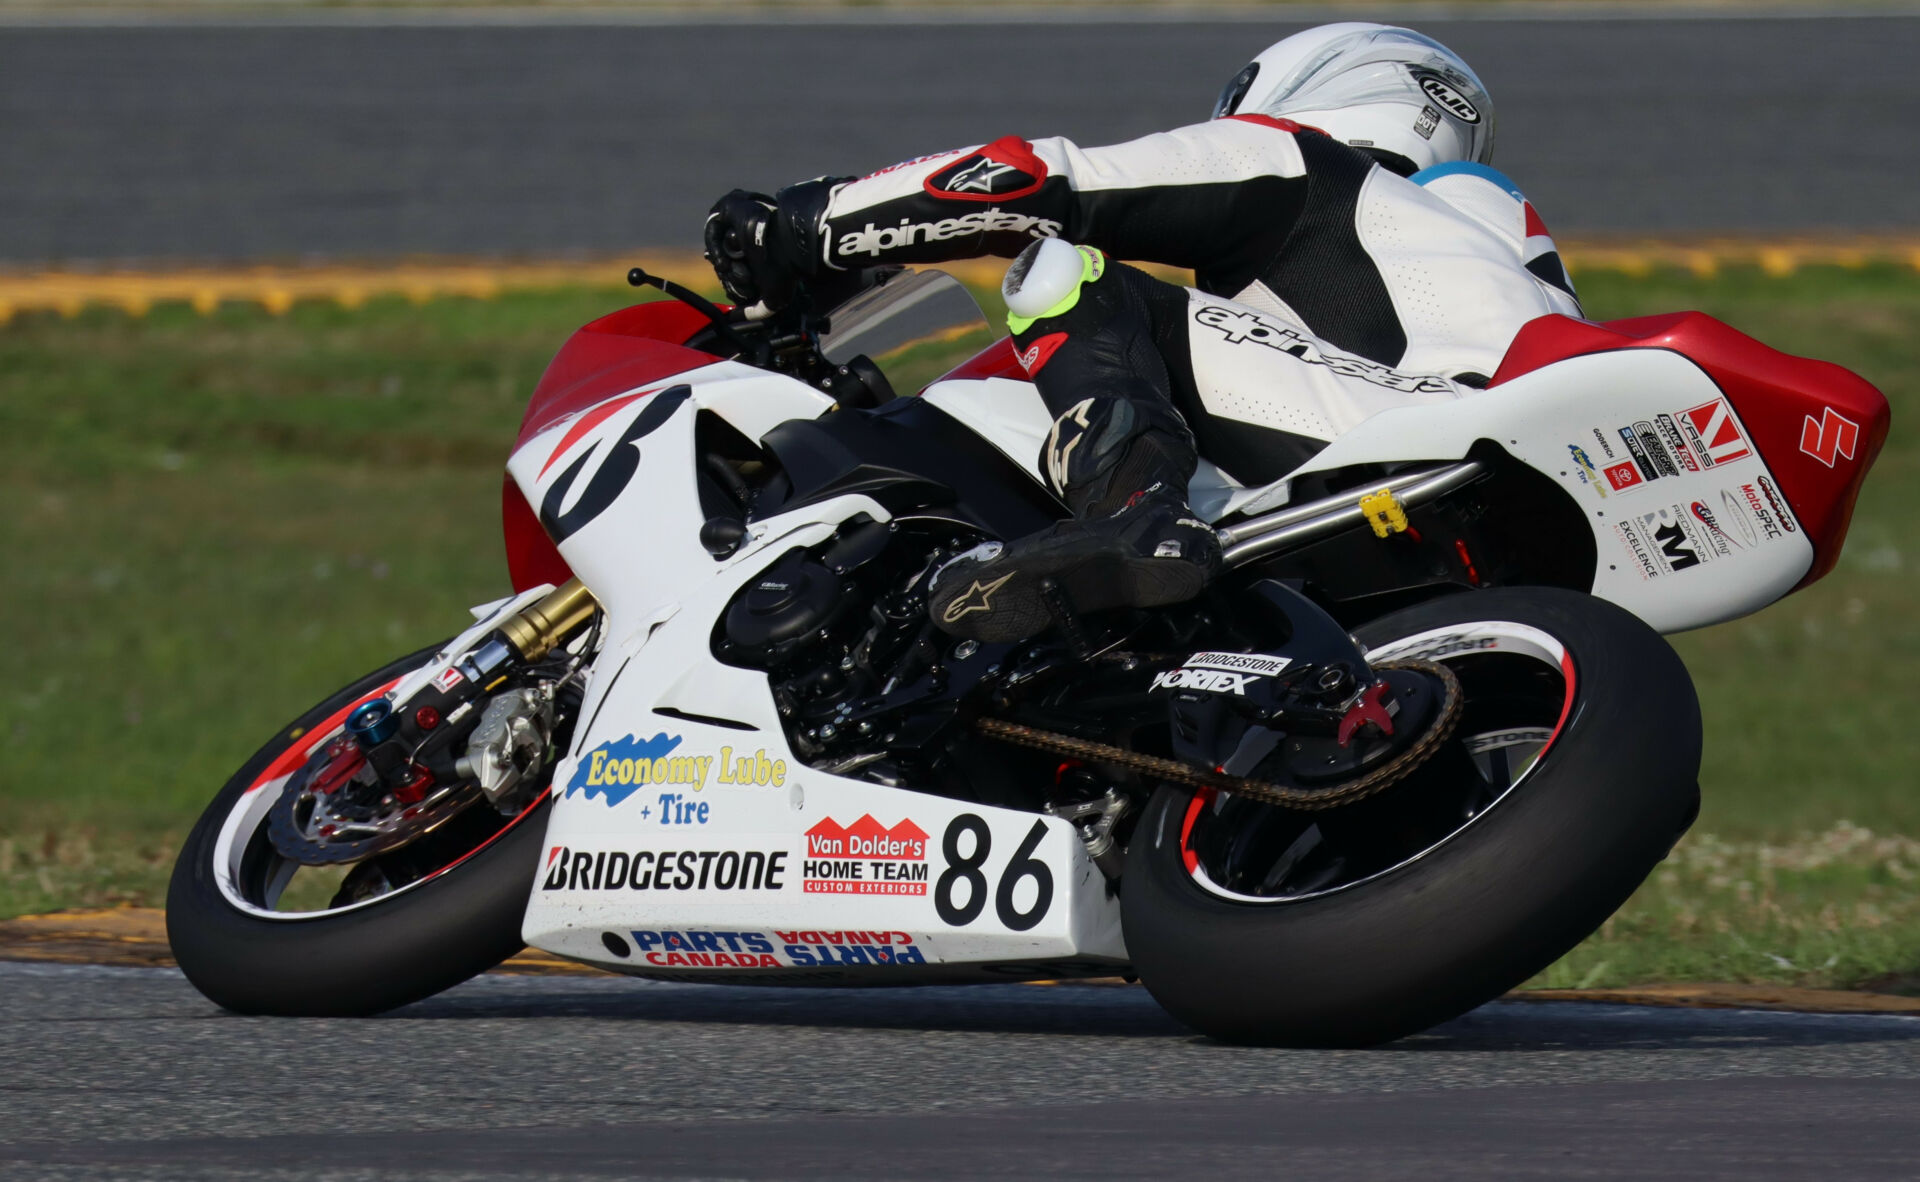 Three-time Canadian Superbike Champion Ben Young (86) is racing a Van Dolder’s Home Team Suzuki GSX-R750 in the 2024 Canadian Sport Bike Championship as well as defending his title in the Superbike class. Photo by Colin Fraser, courtesy CSBK.